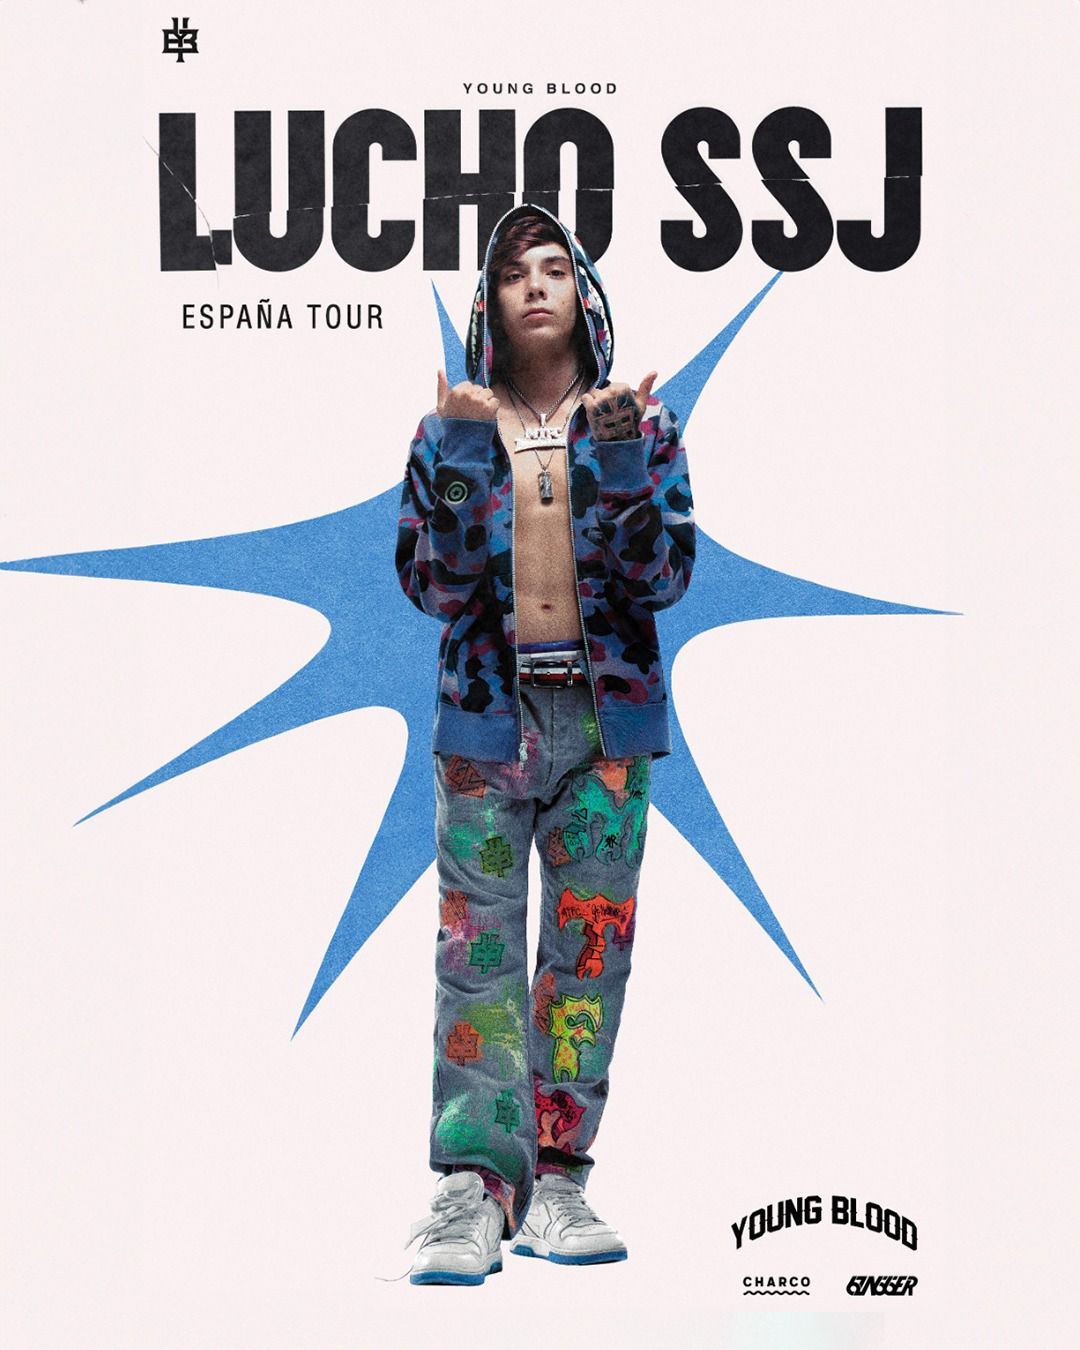 Universo (Lucho SSJ and Special Guest): Universo djs + Lucho SSJ (showcase) + Special Guest